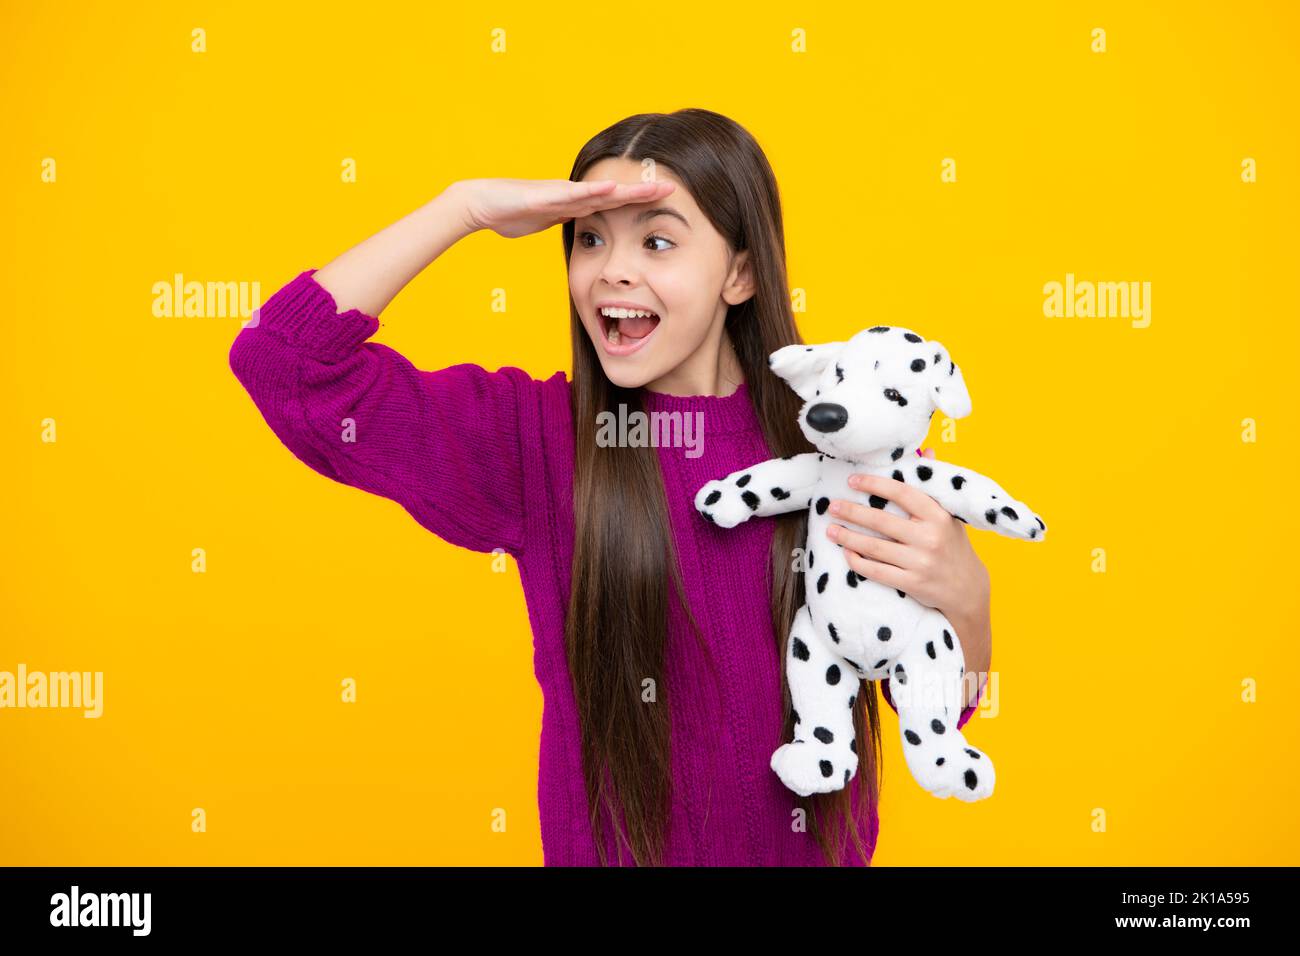 Excited face. Teen girl child in casual wear holding plush toy isolated on yellow background, happy childhood. Amazed expression, cheerful and glad. Stock Photo